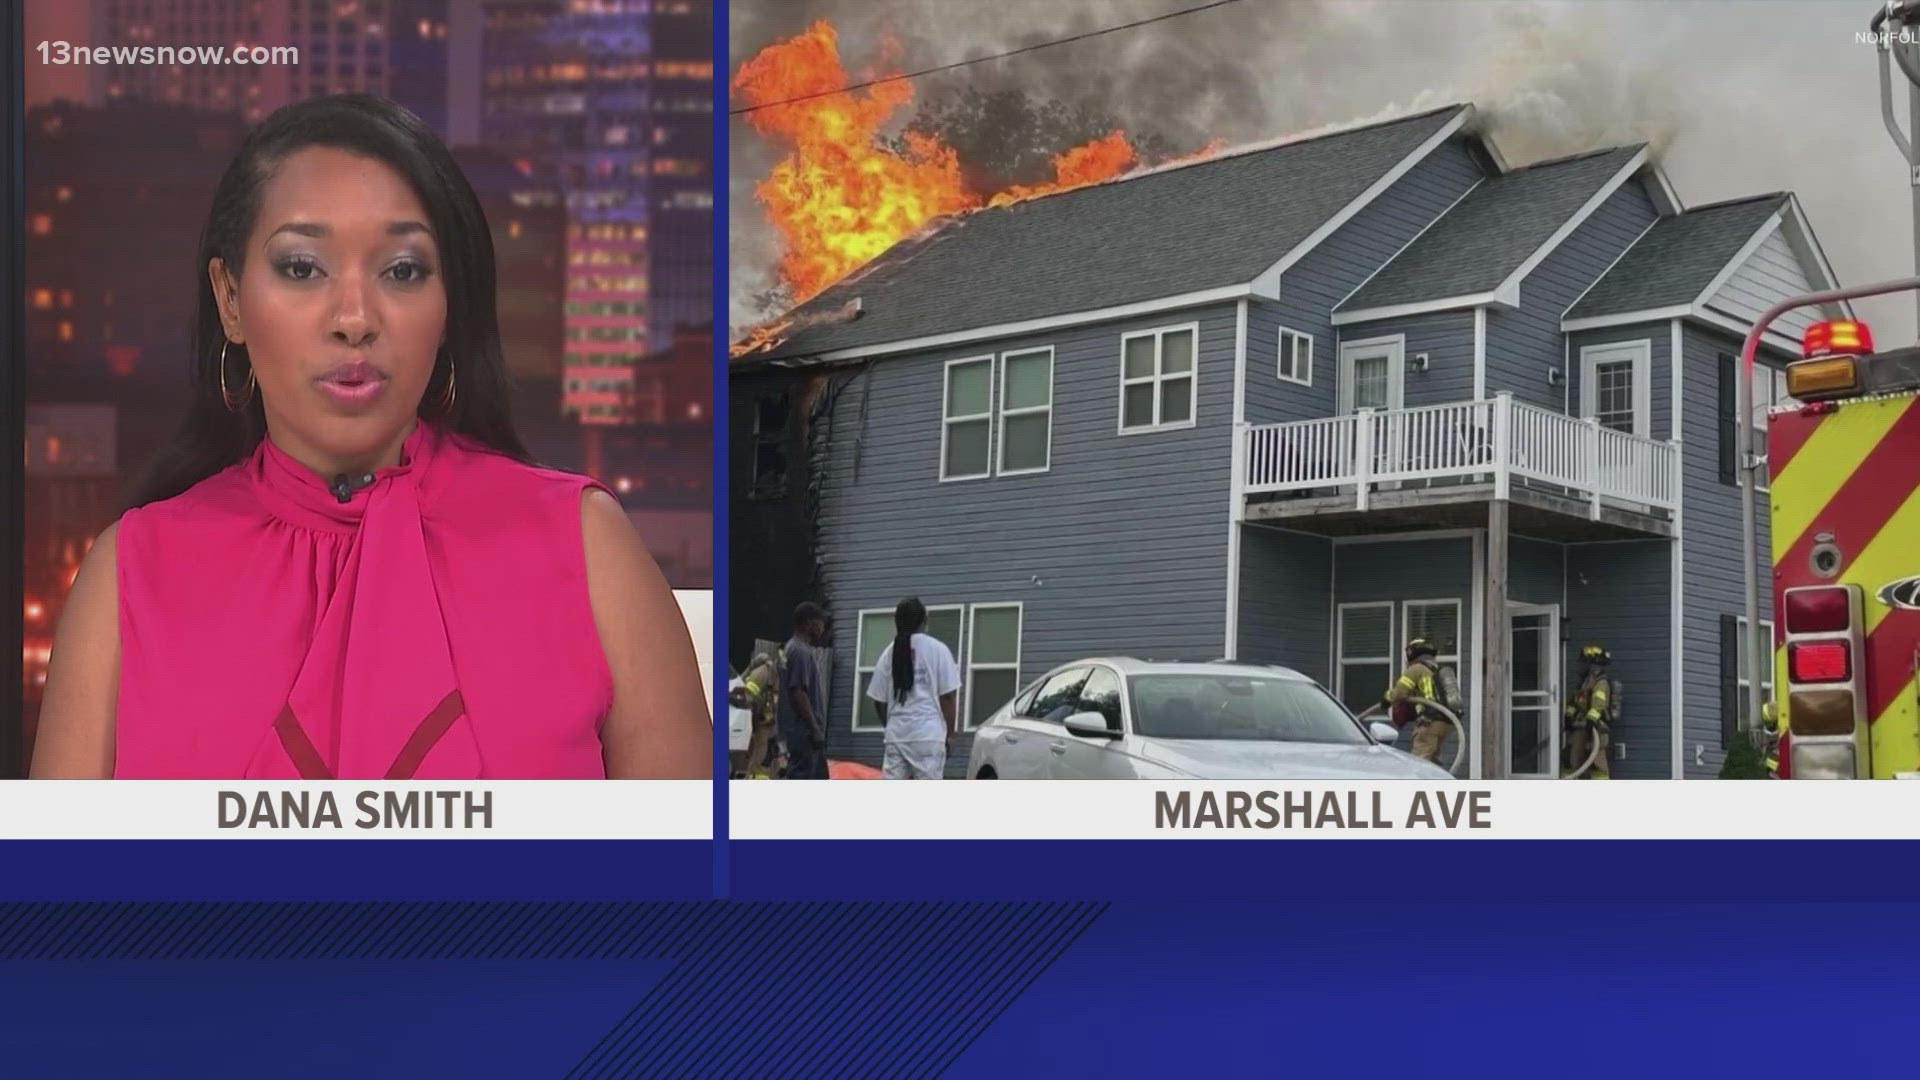 The fire was reported in the 700 block of Marshall Avenue shortly before 7 p.m. Monday.